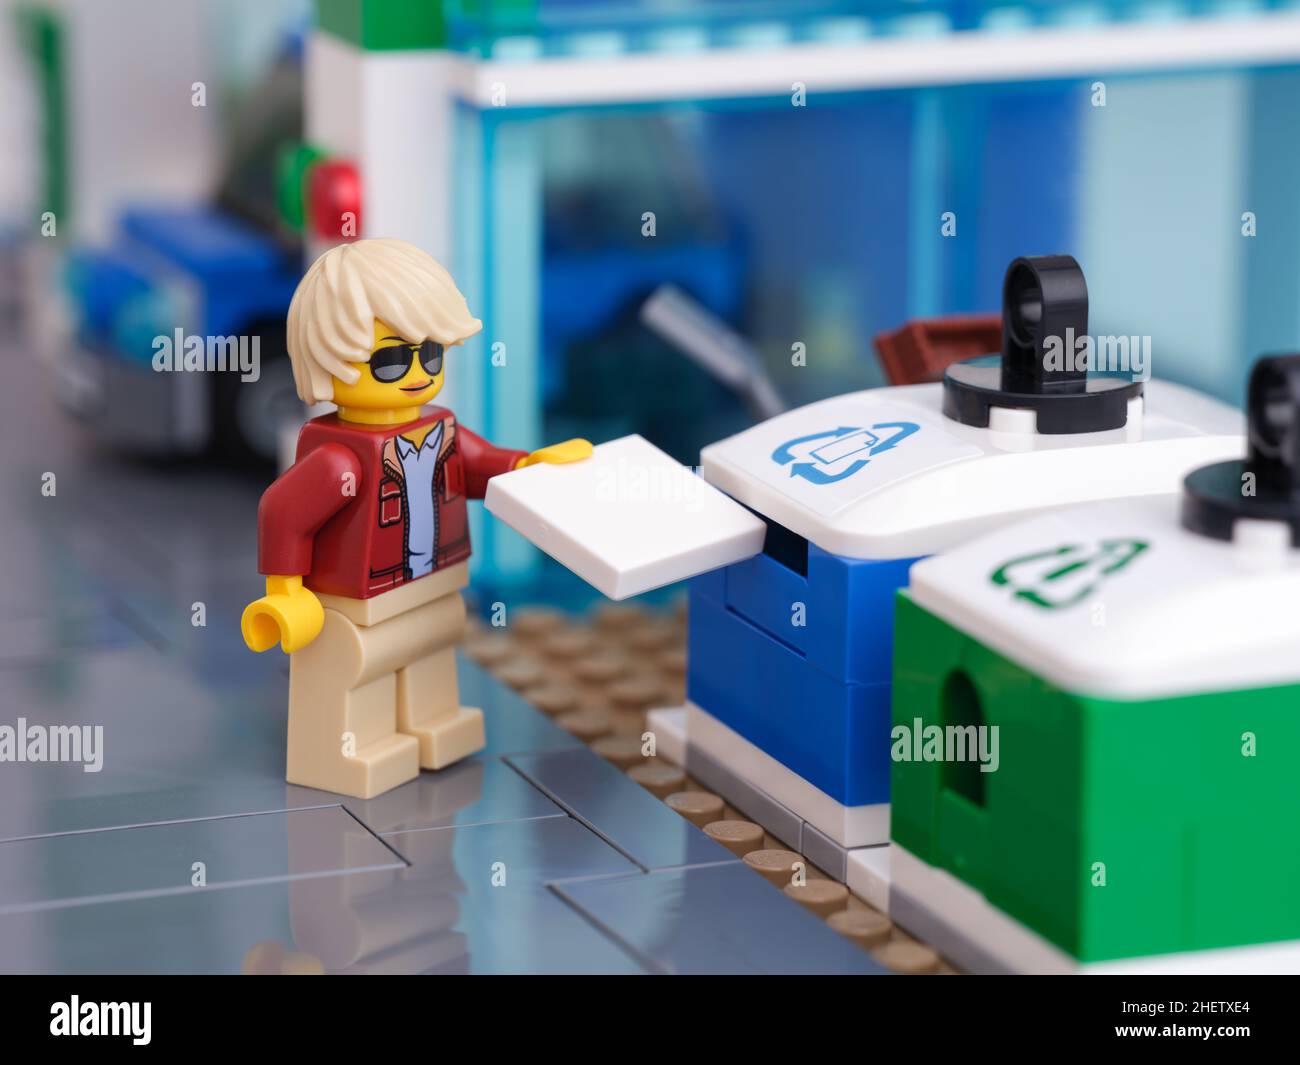 Tambov, Russian Federation - January 11, 2022 A Lego woman minifigure putting a piece of paper into a recycling bin for paper. Close up. Stock Photo